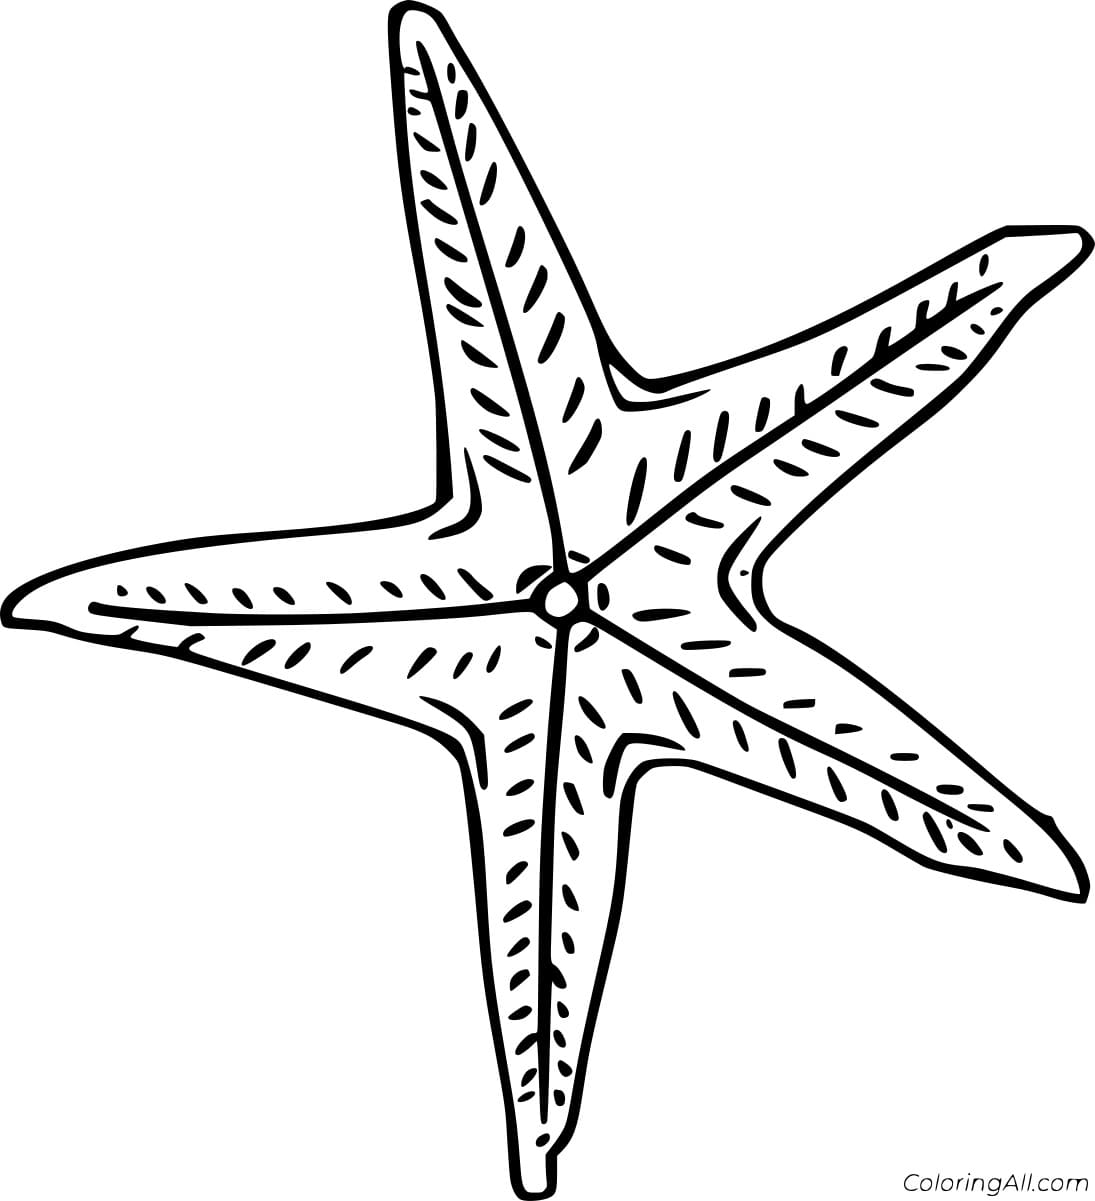 One Sea Star Image Coloring Page